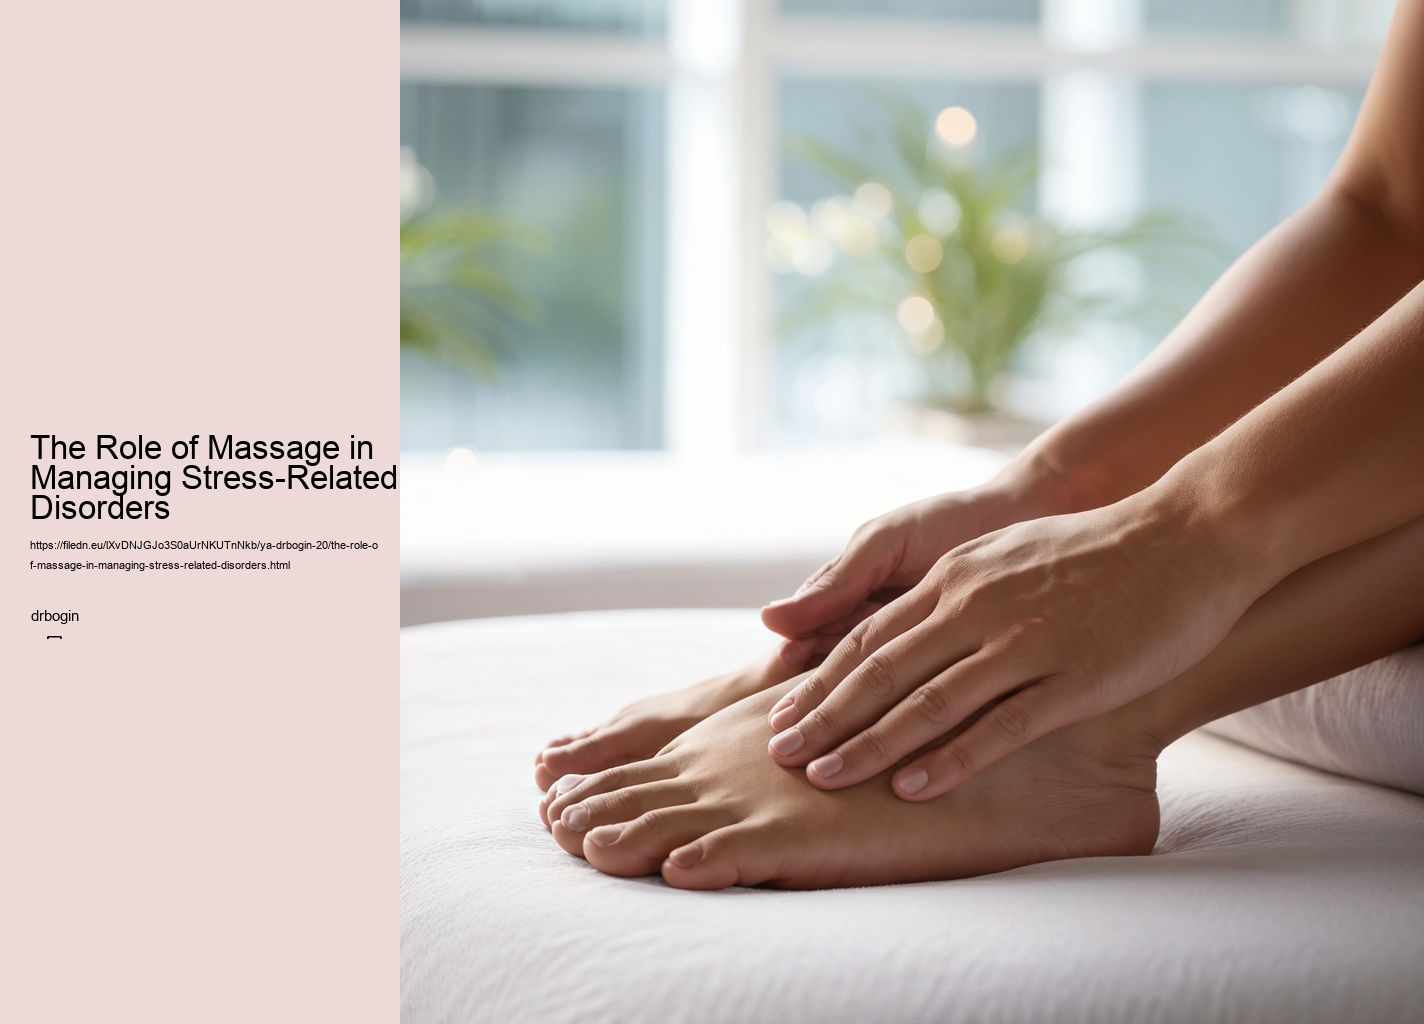 The Role of Massage in Managing Stress-Related Disorders